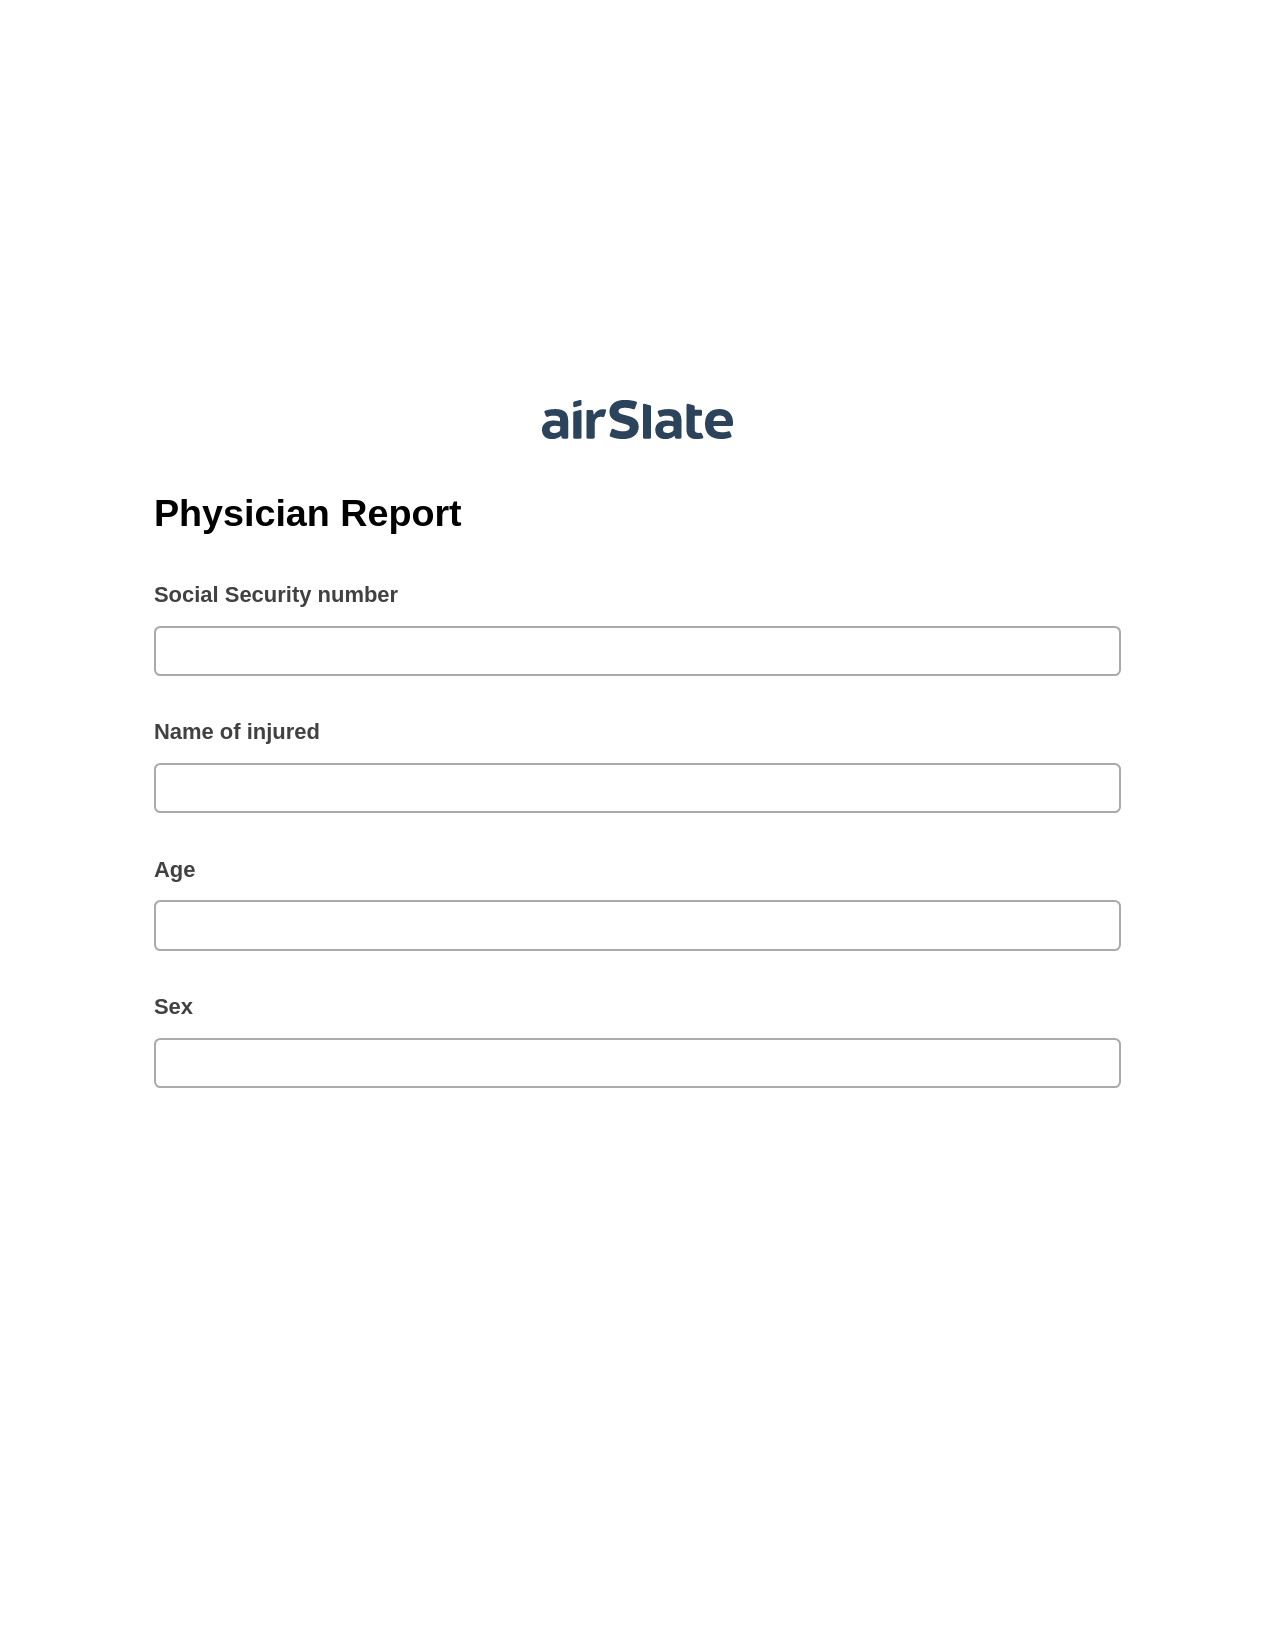 Multirole Physician Report Pre-fill Dropdowns from Office 365 Excel Bot, Update NetSuite Record Bot, Archive to SharePoint Folder Bot